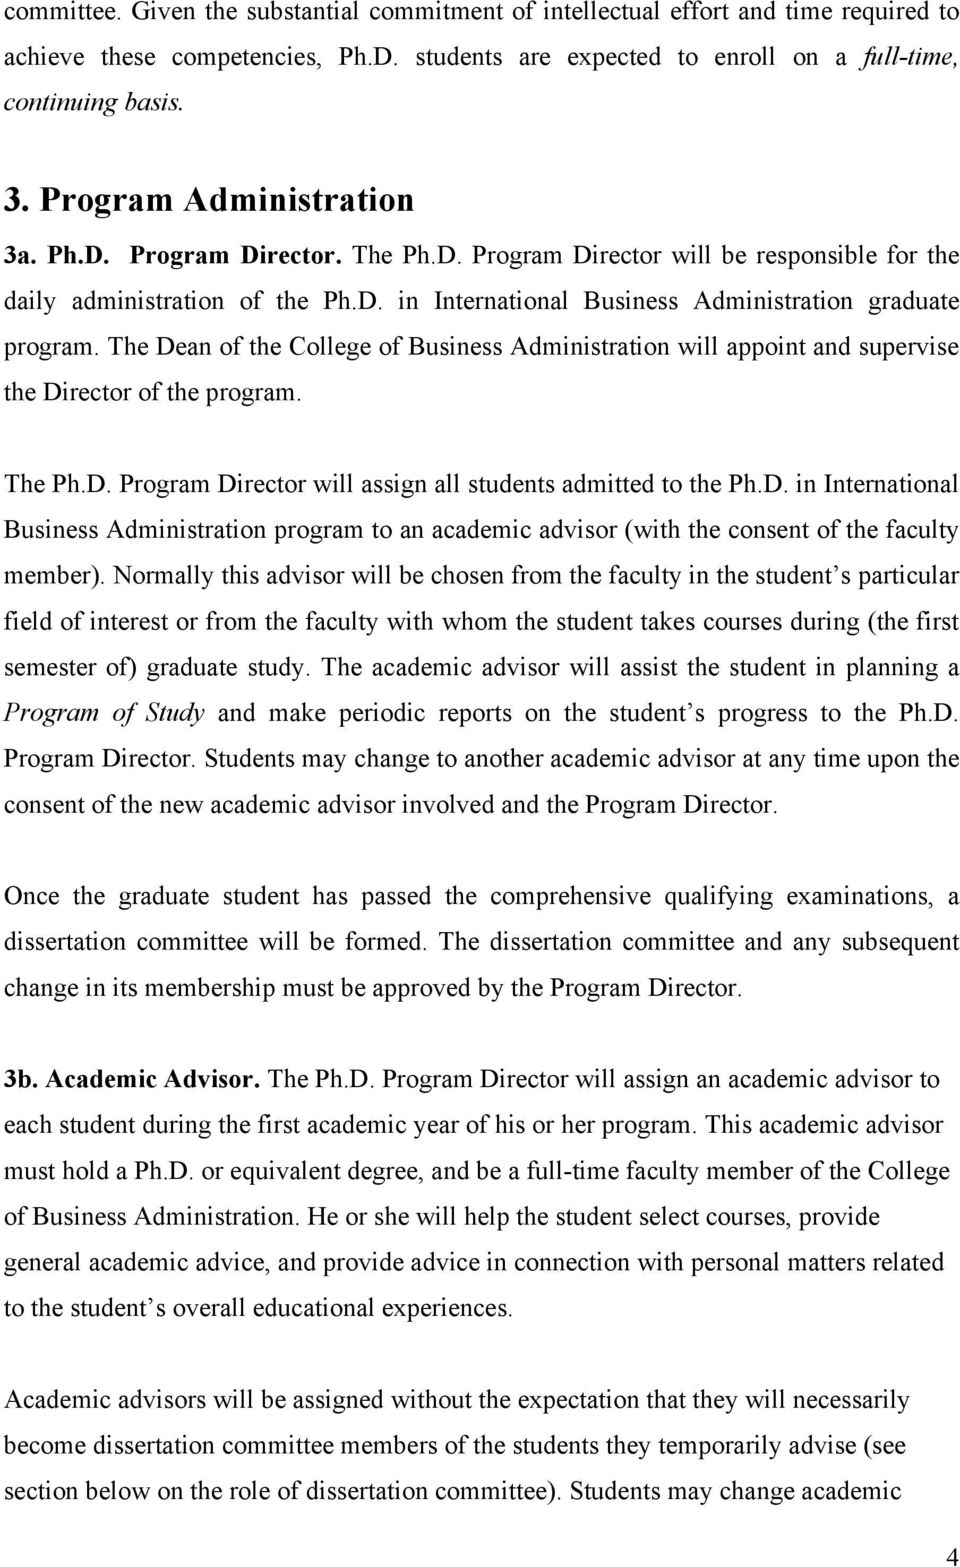 The Dean of the College of Business Administration will appoint and supervise the Director of the program. The Ph.D. Program Director will assign all students admitted to the Ph.D. in International Business Administration program to an academic advisor (with the consent of the faculty member).